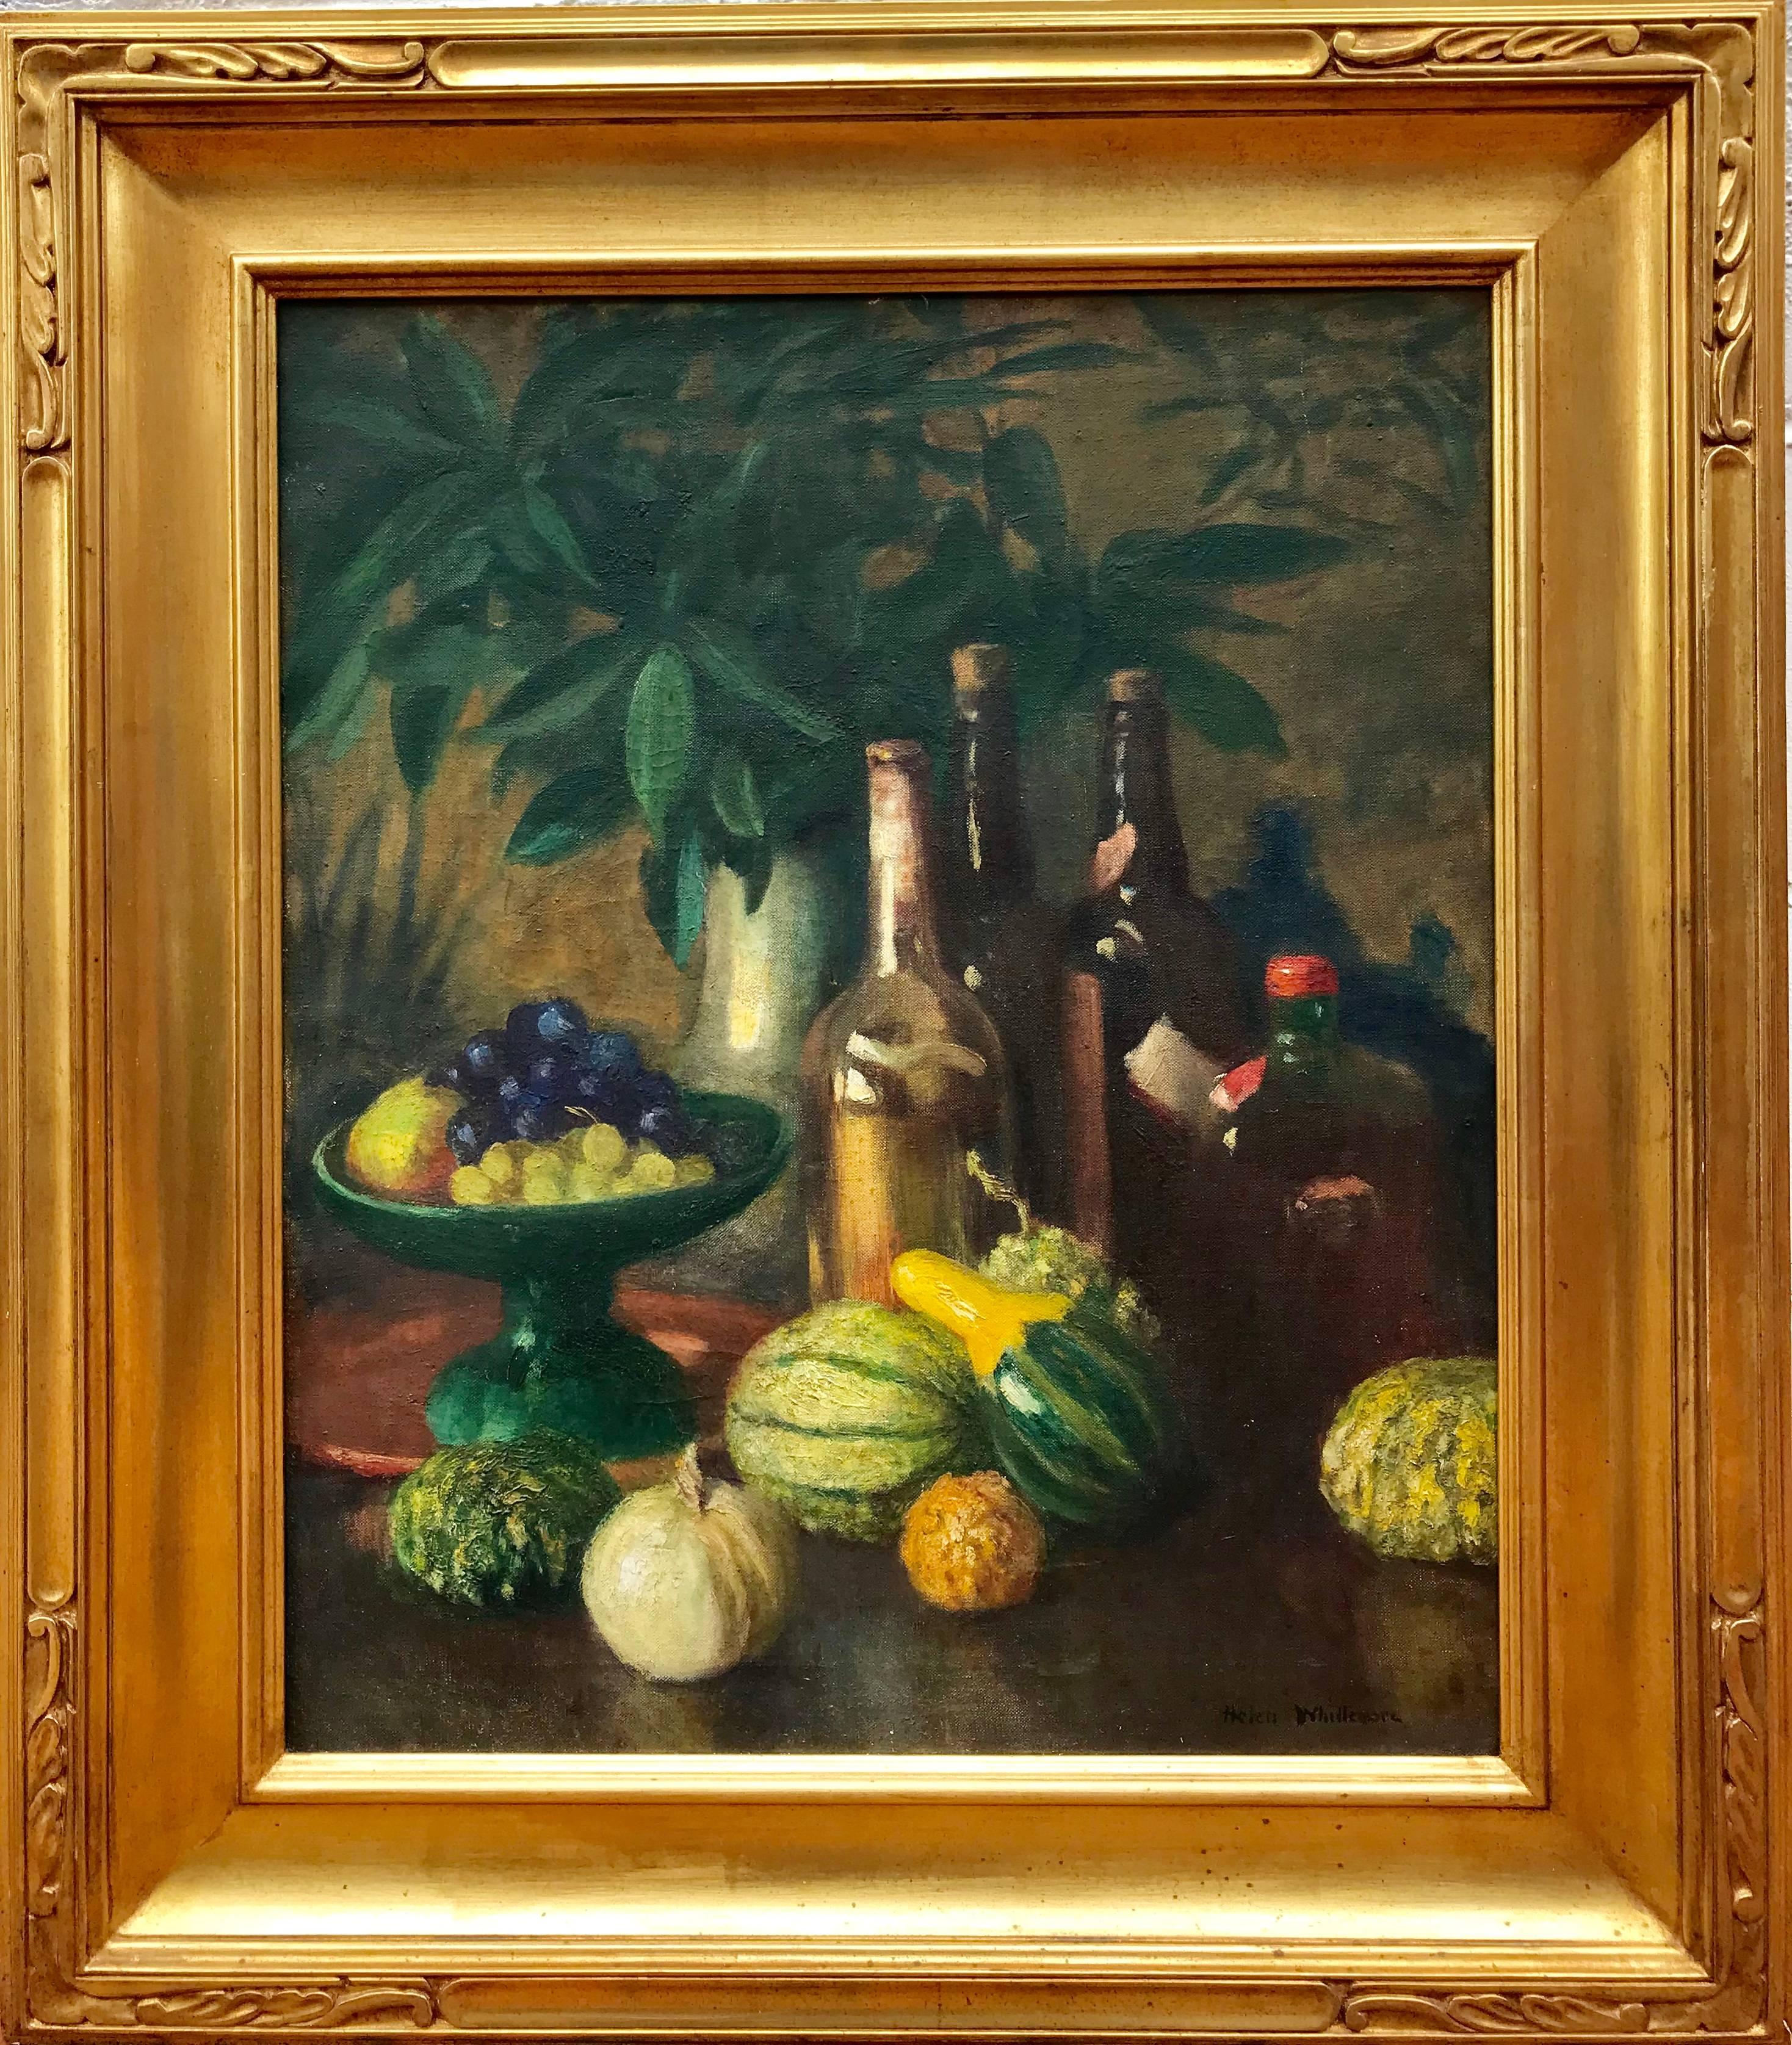 Oil on canvas painting by the American artist, Helen Simpson Whittemore.  Signed lower right. Framed in custom made gold leaf frame. Overall size framed 33 by 28.75 inches.

Helen Simpson Whittemore lived in East Hampton, Long Island. She studied